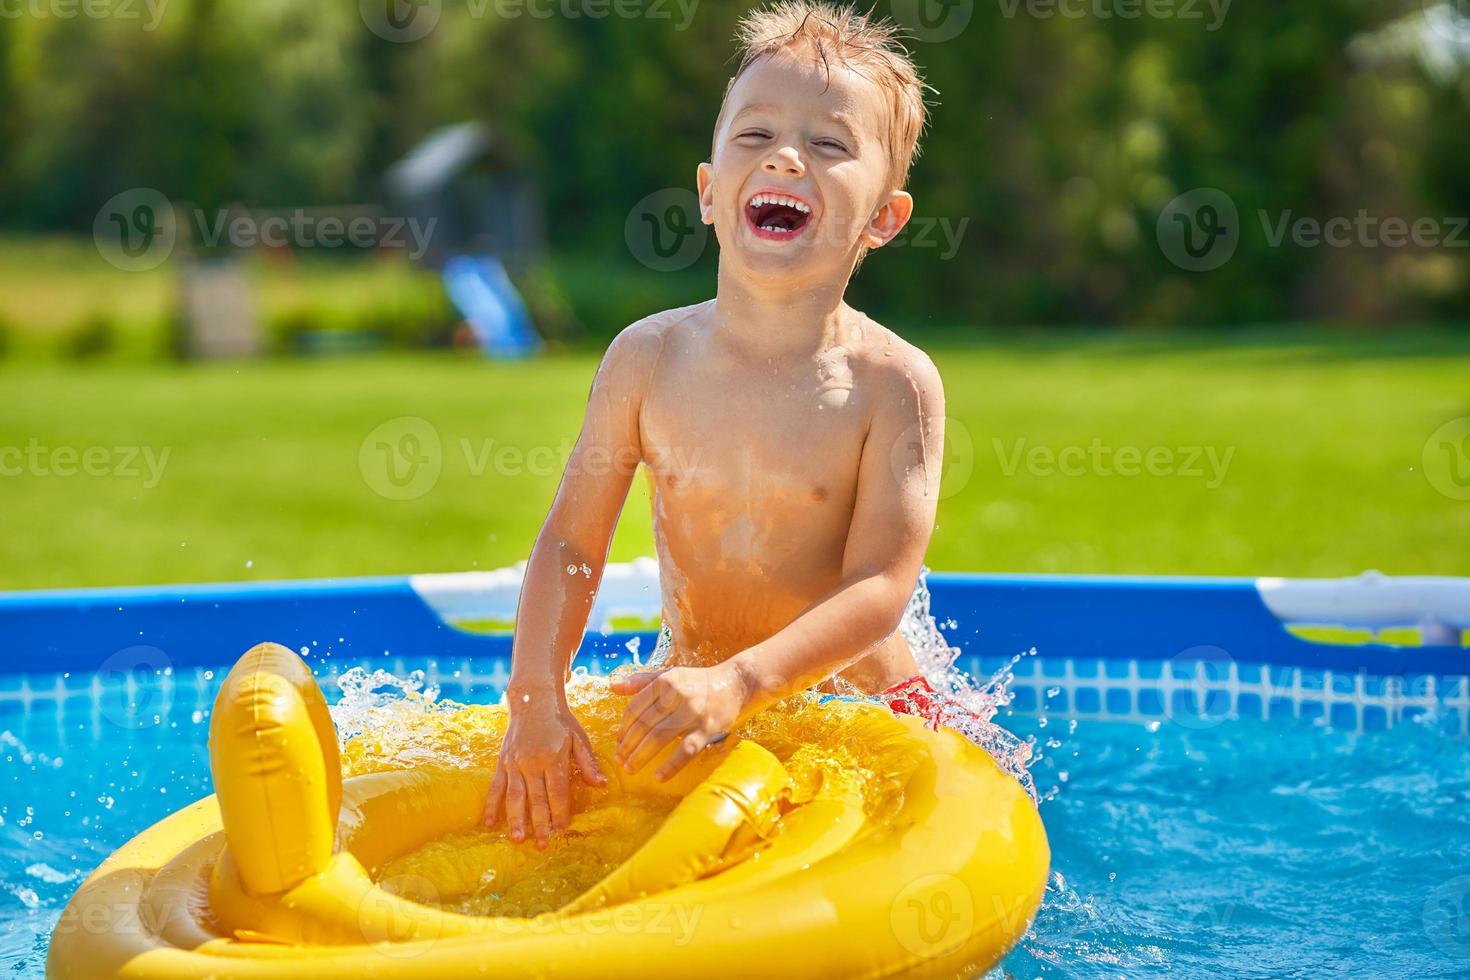 Cute boy swimming and playing in a backyard pool photo